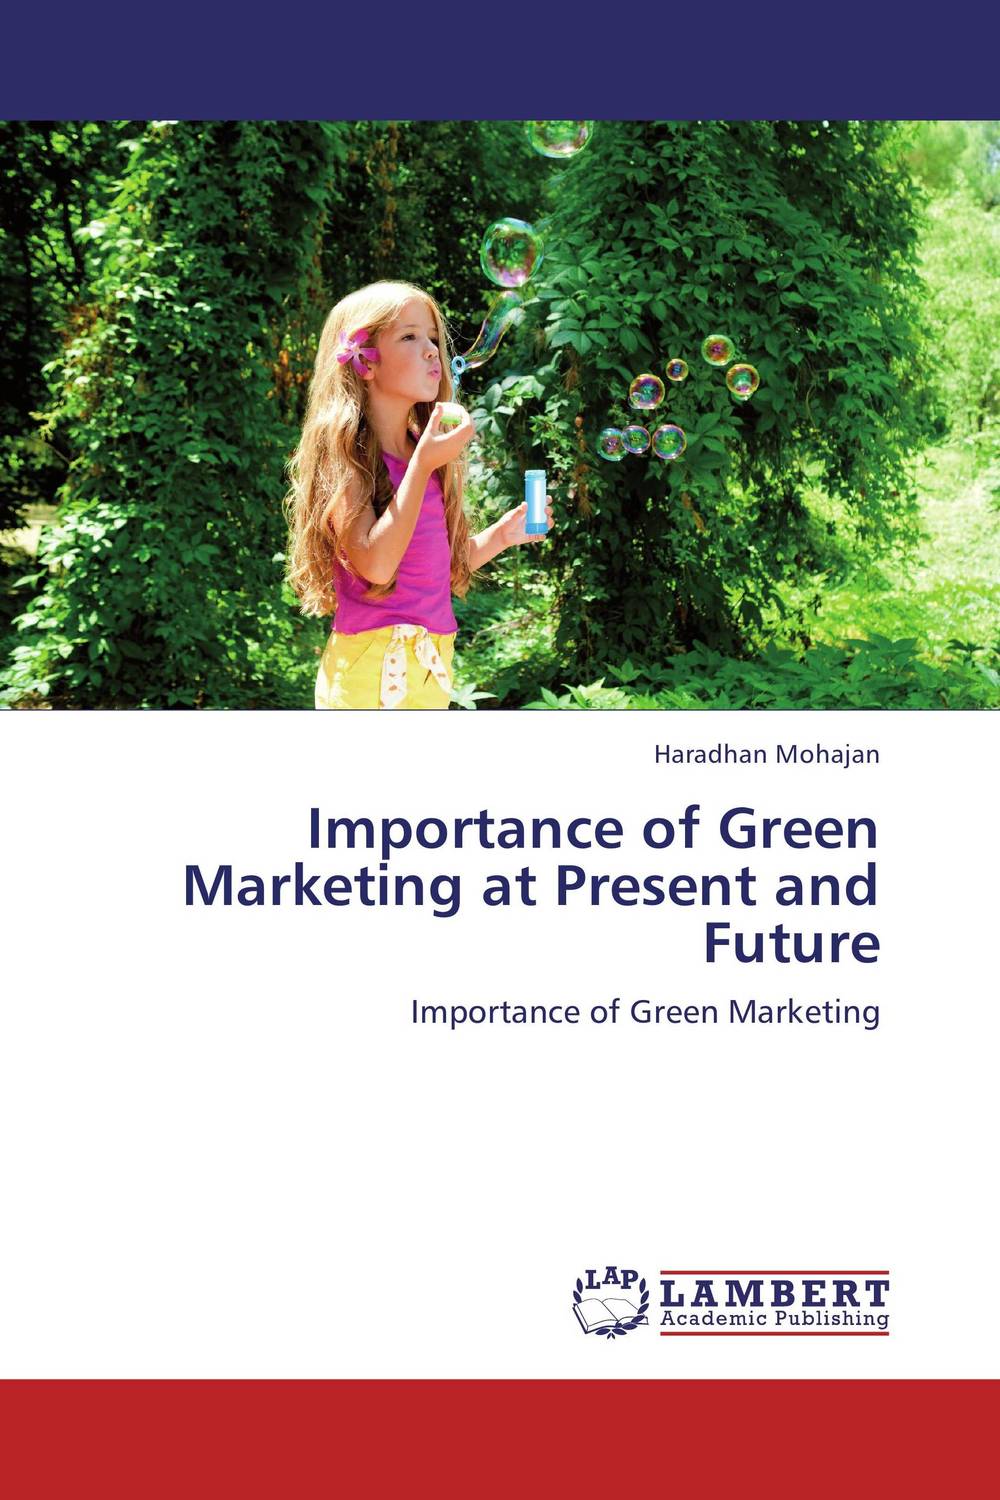 Importance of Green Marketing at Present and Future